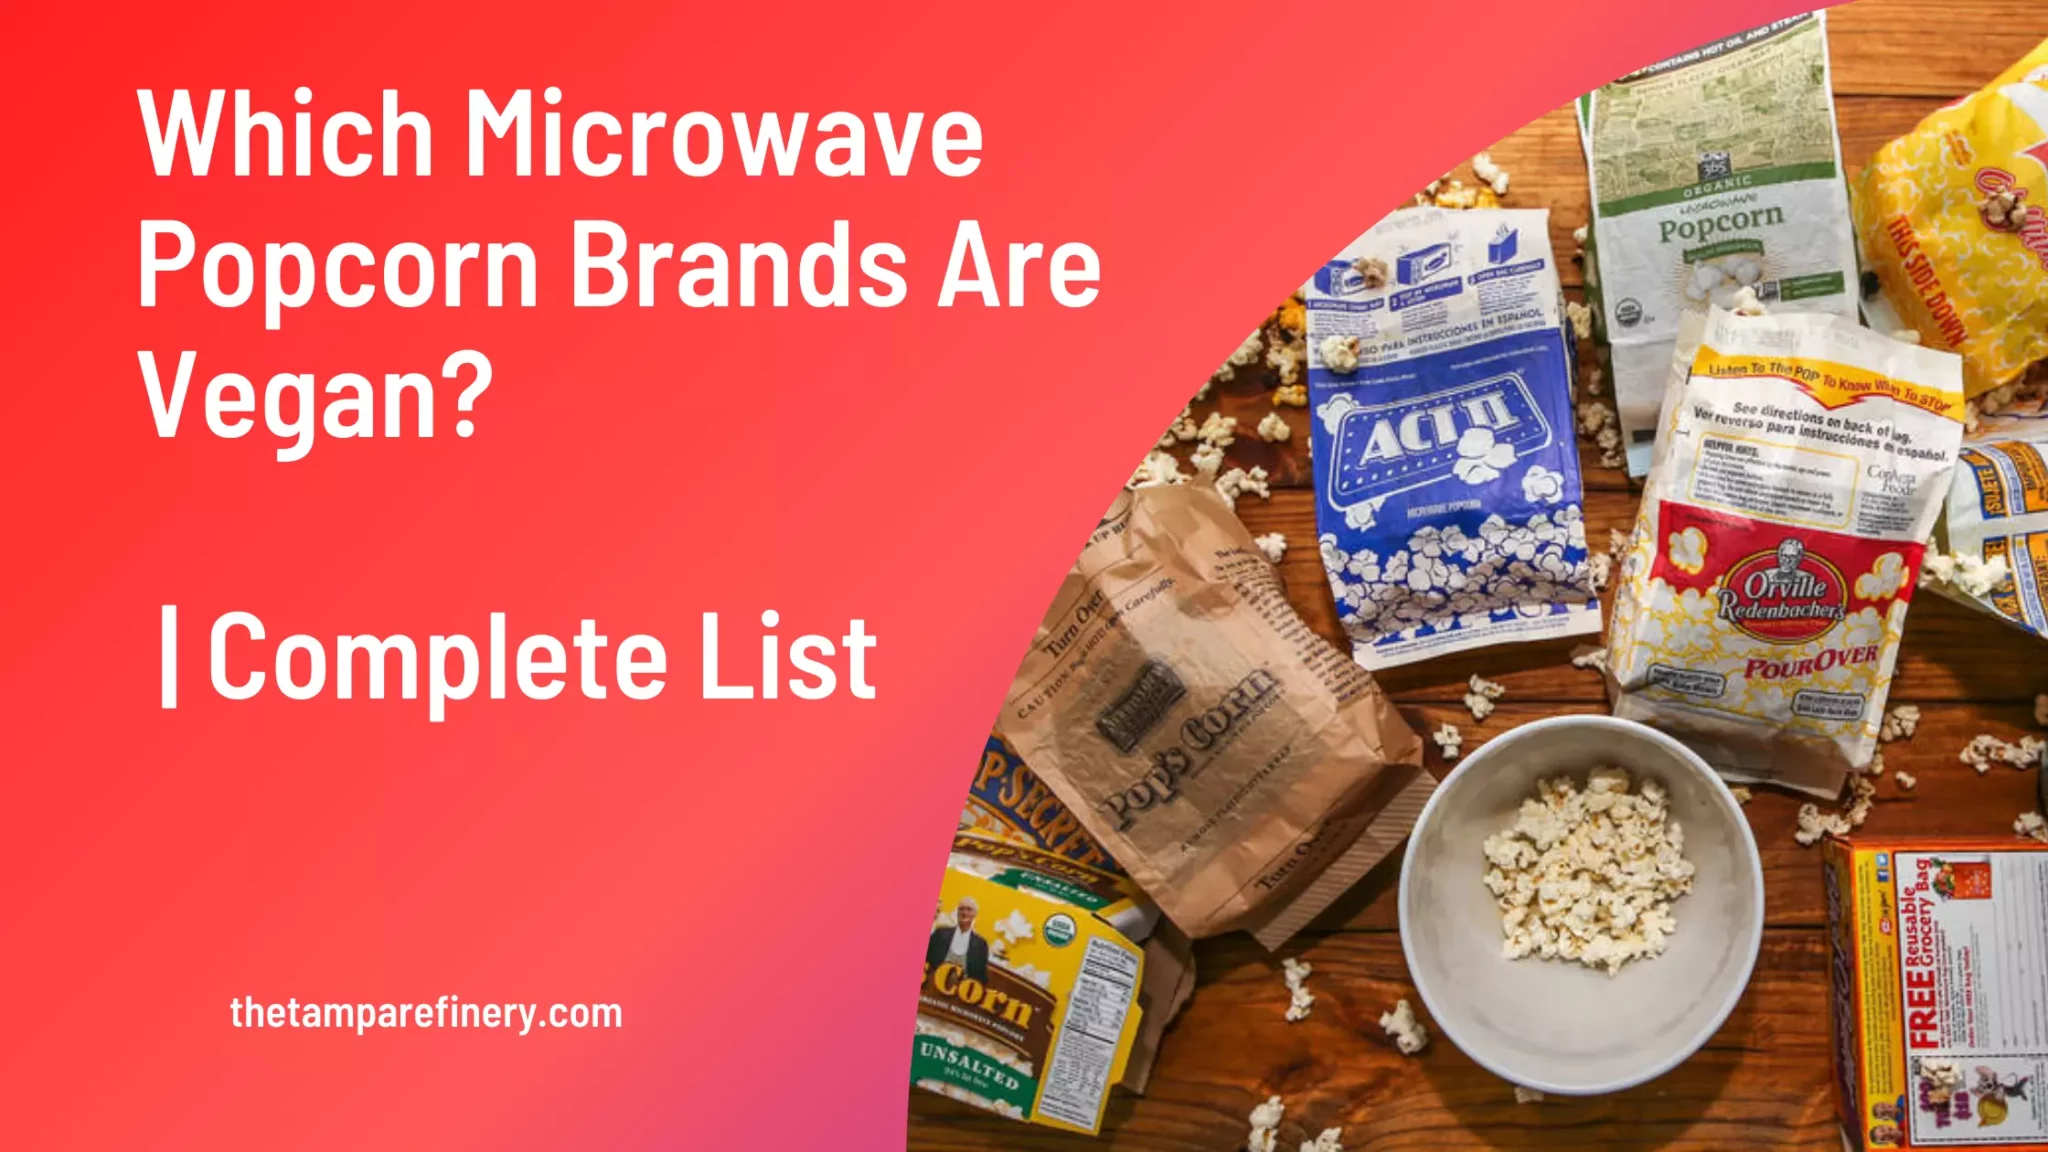 Which Microwave Popcorn Brands Are Vegan